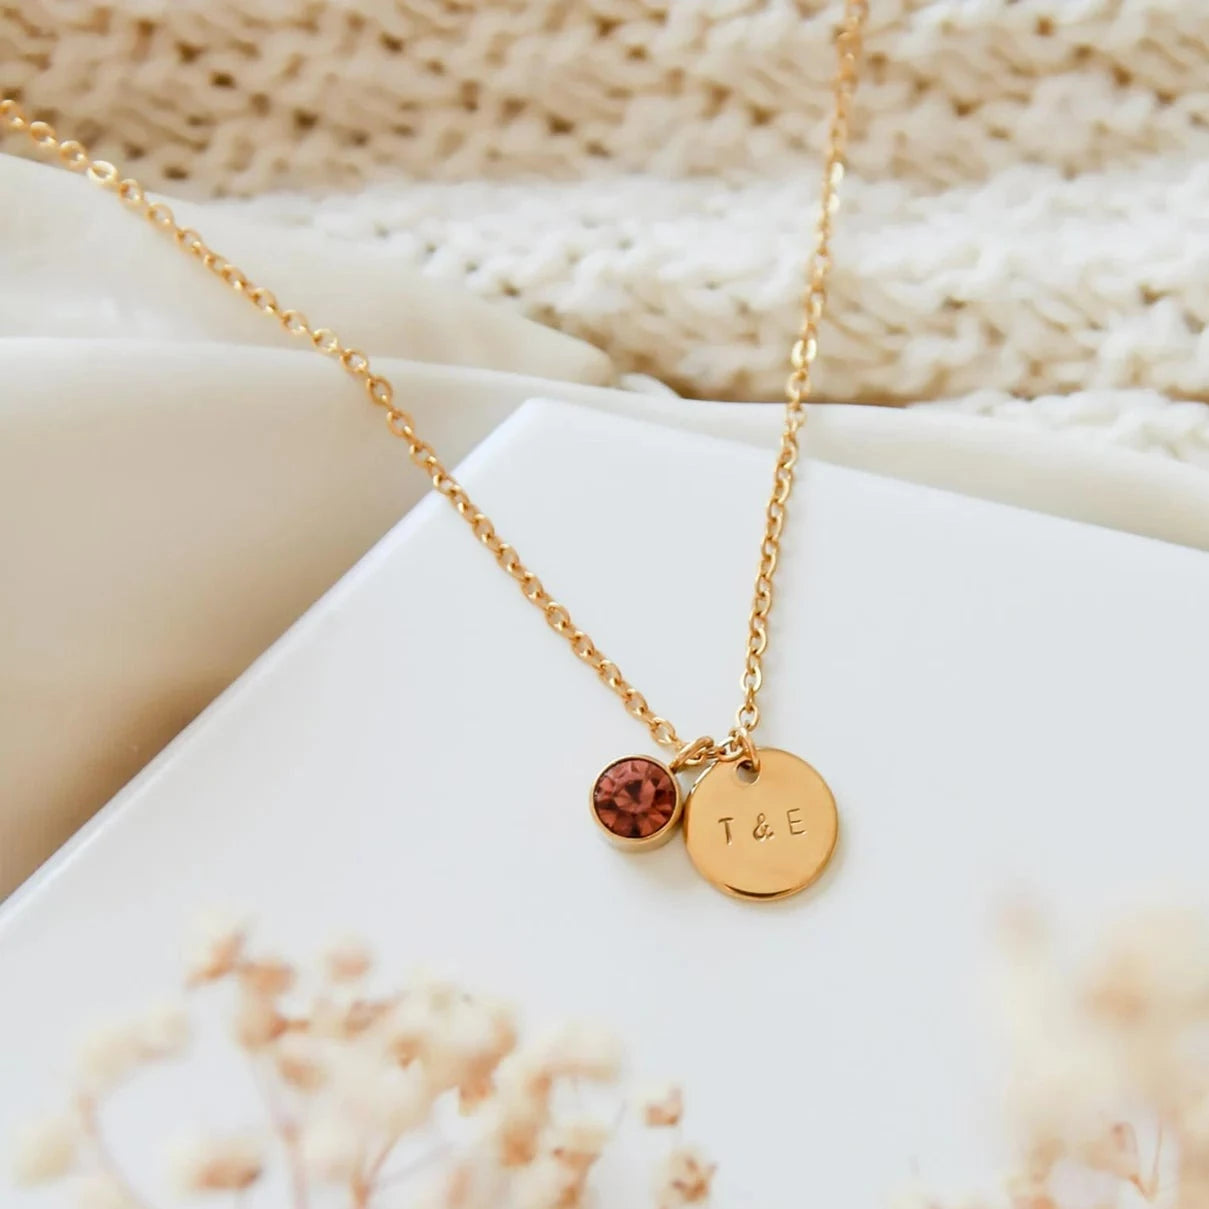 Personalized Alphabet Initial Birthstone Necklace. Locally designed and handcrafted. Delivered in 3-5 days across Dubai and the UAE.